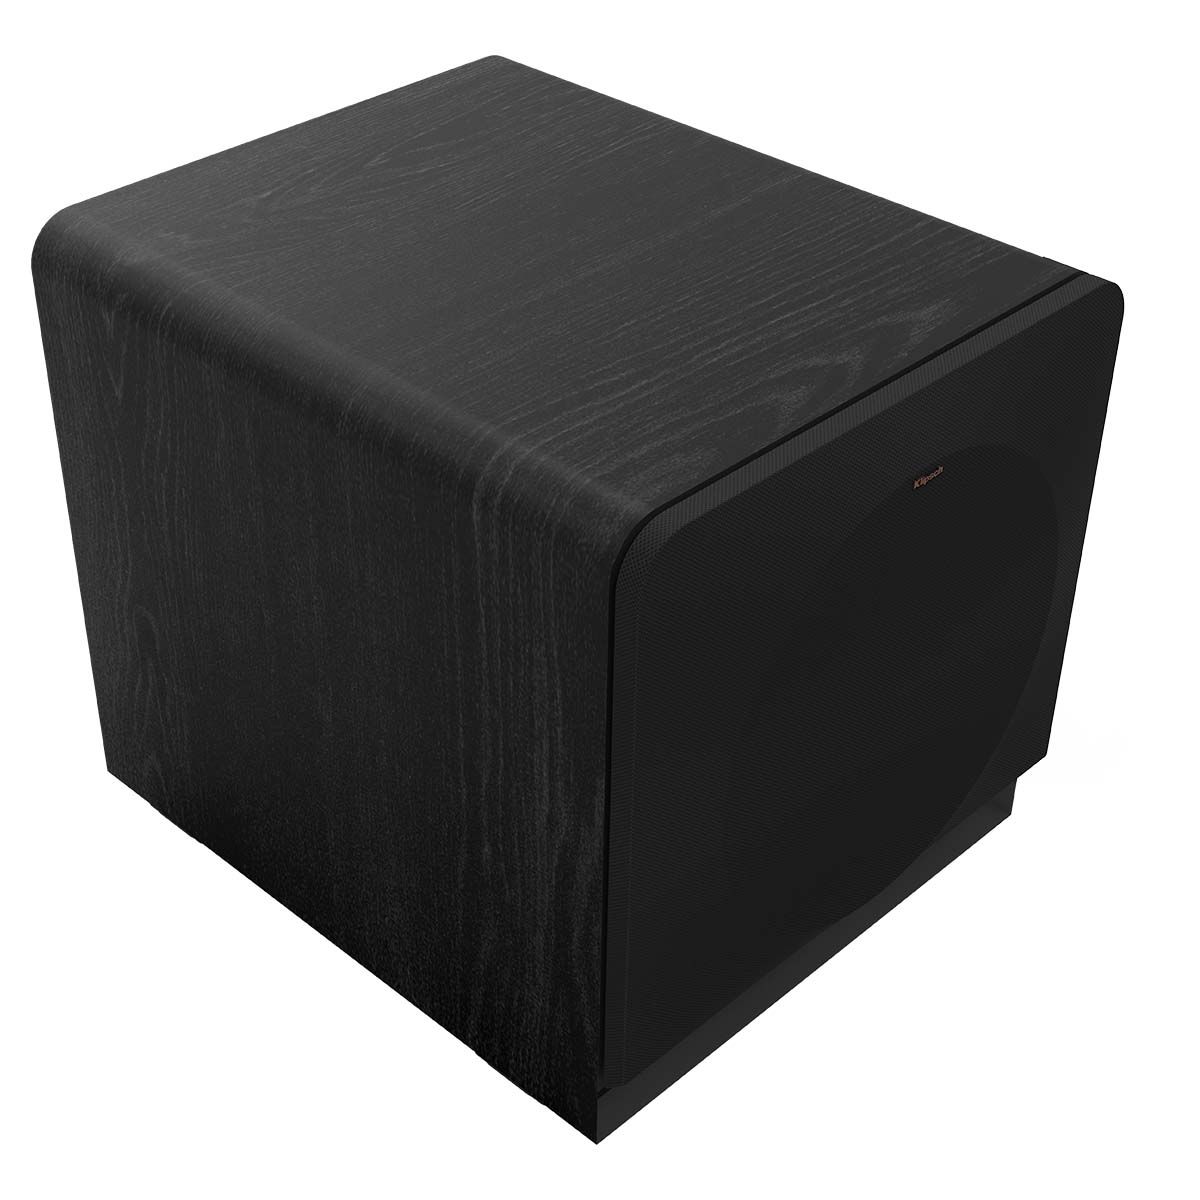 Klipsch RP-1400SW 14" Powered Subwoofer - Ebony - angled top left view with grille